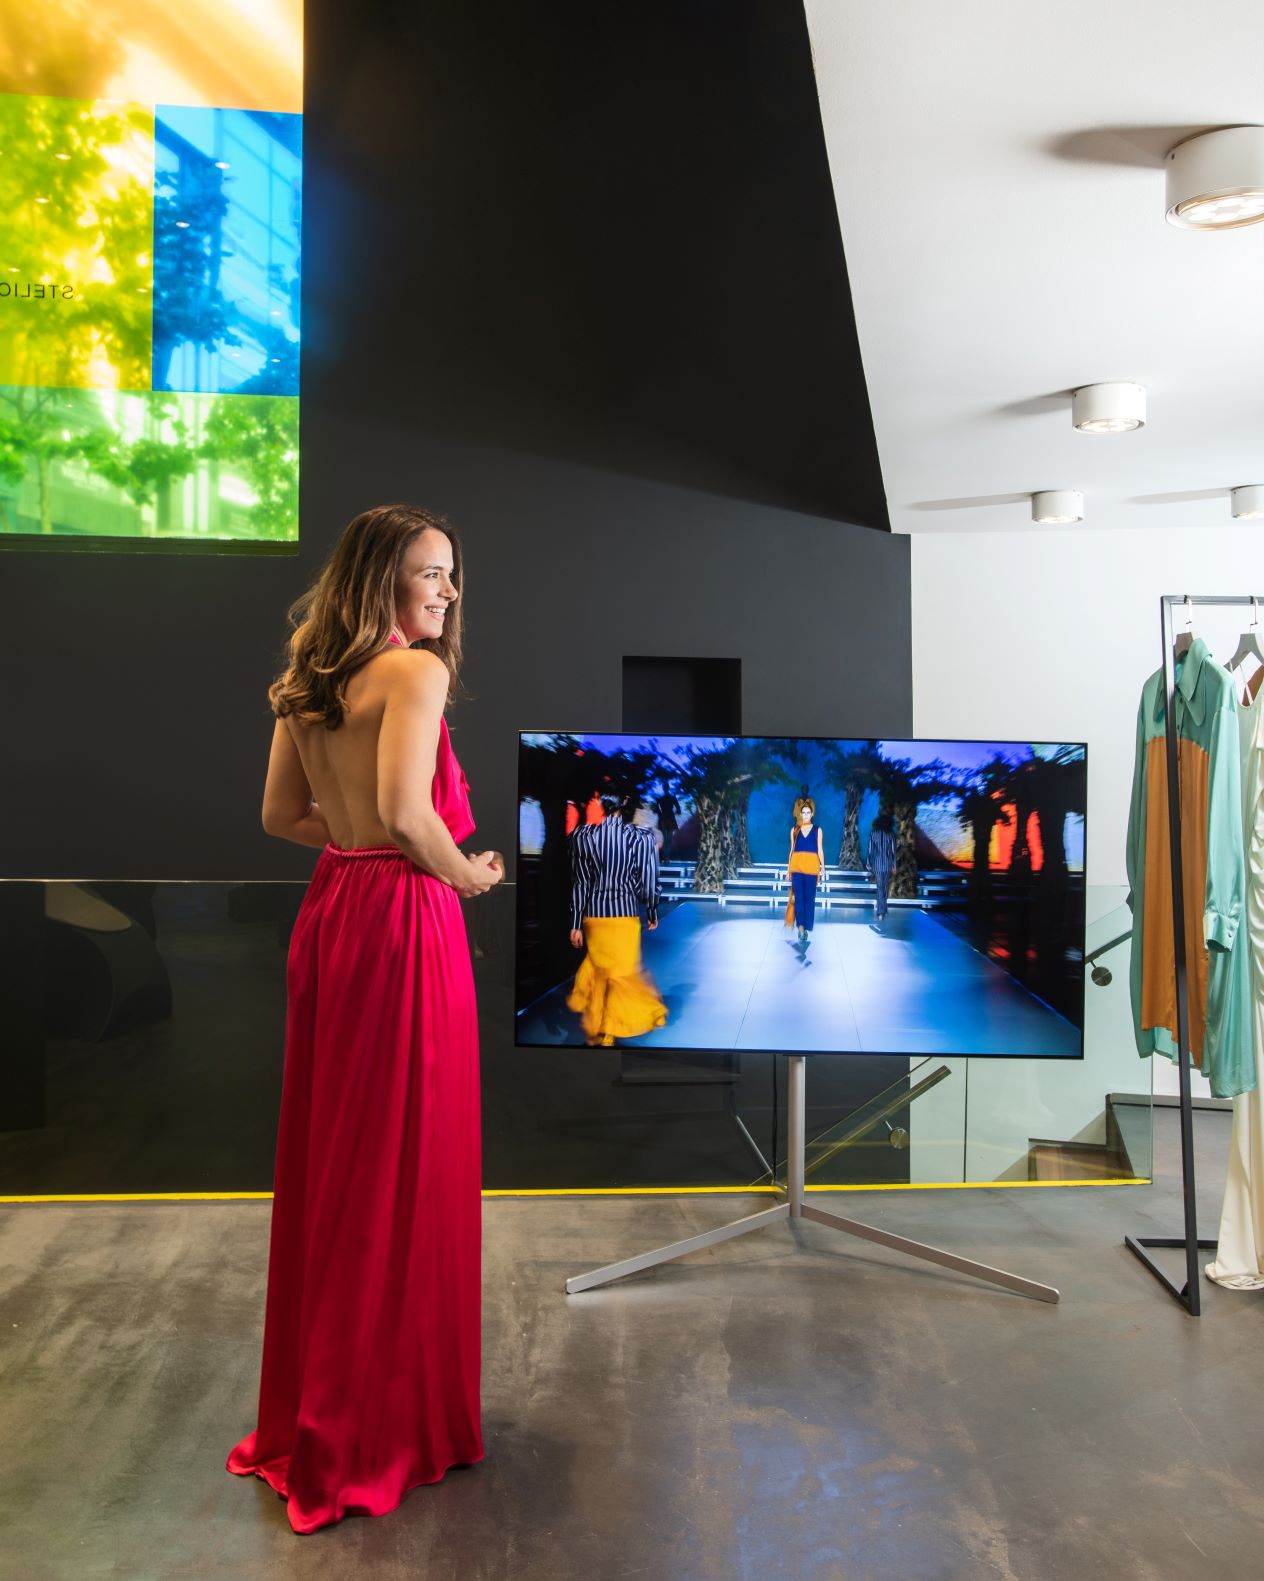 Influencer Eliana Chrysikopoulou pictured with LG G1 OLED at Koudounaris’s showroom